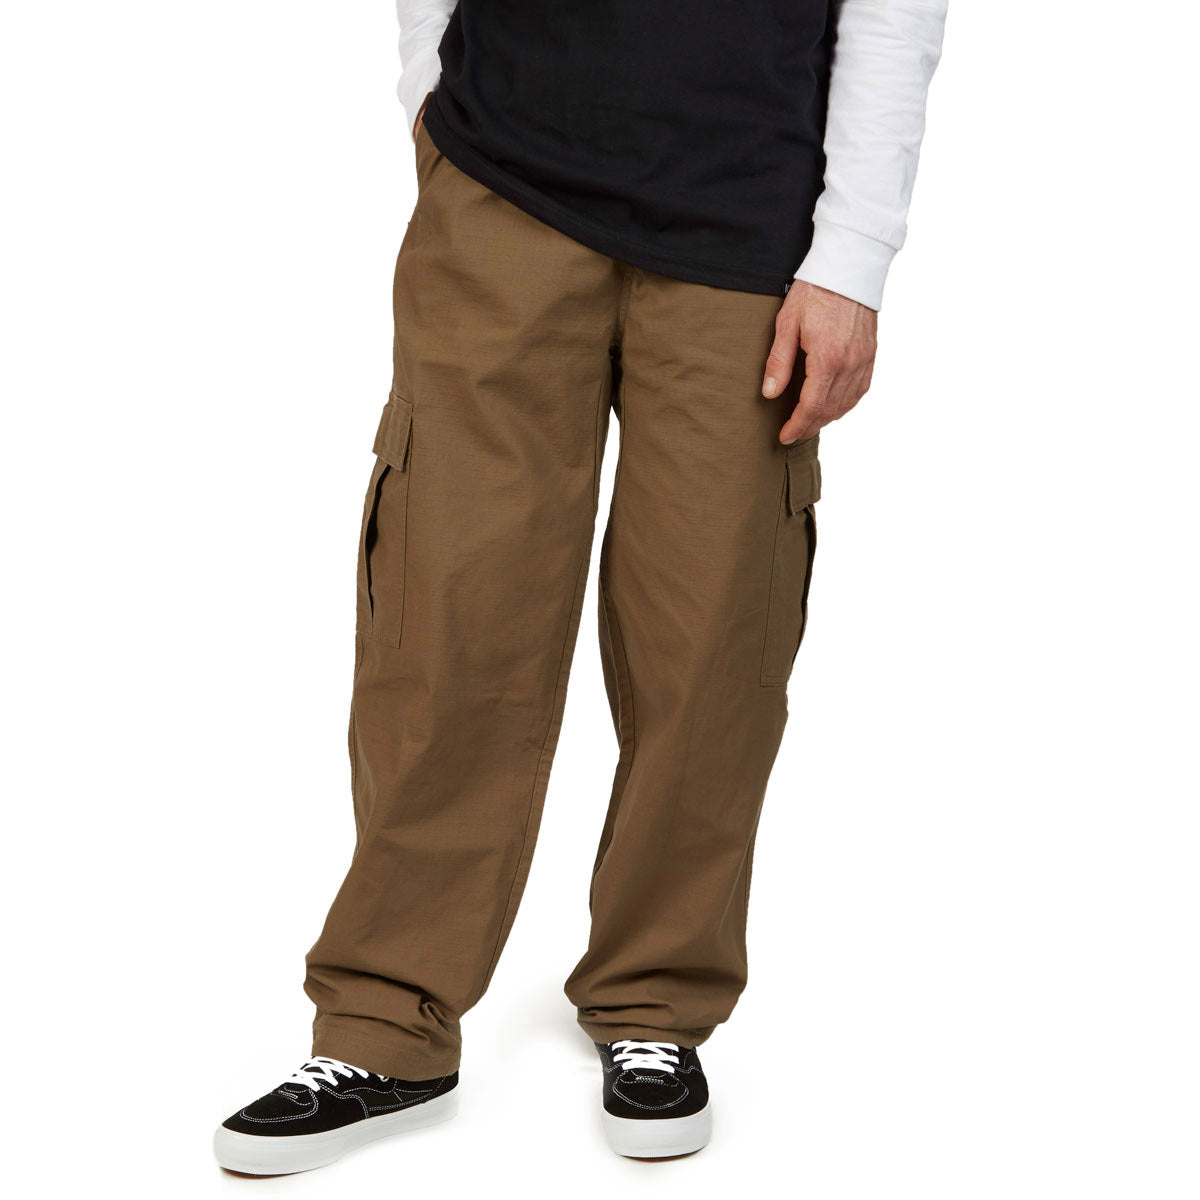 CCS Easy Ripstop Cargo Pants - Brown image 1